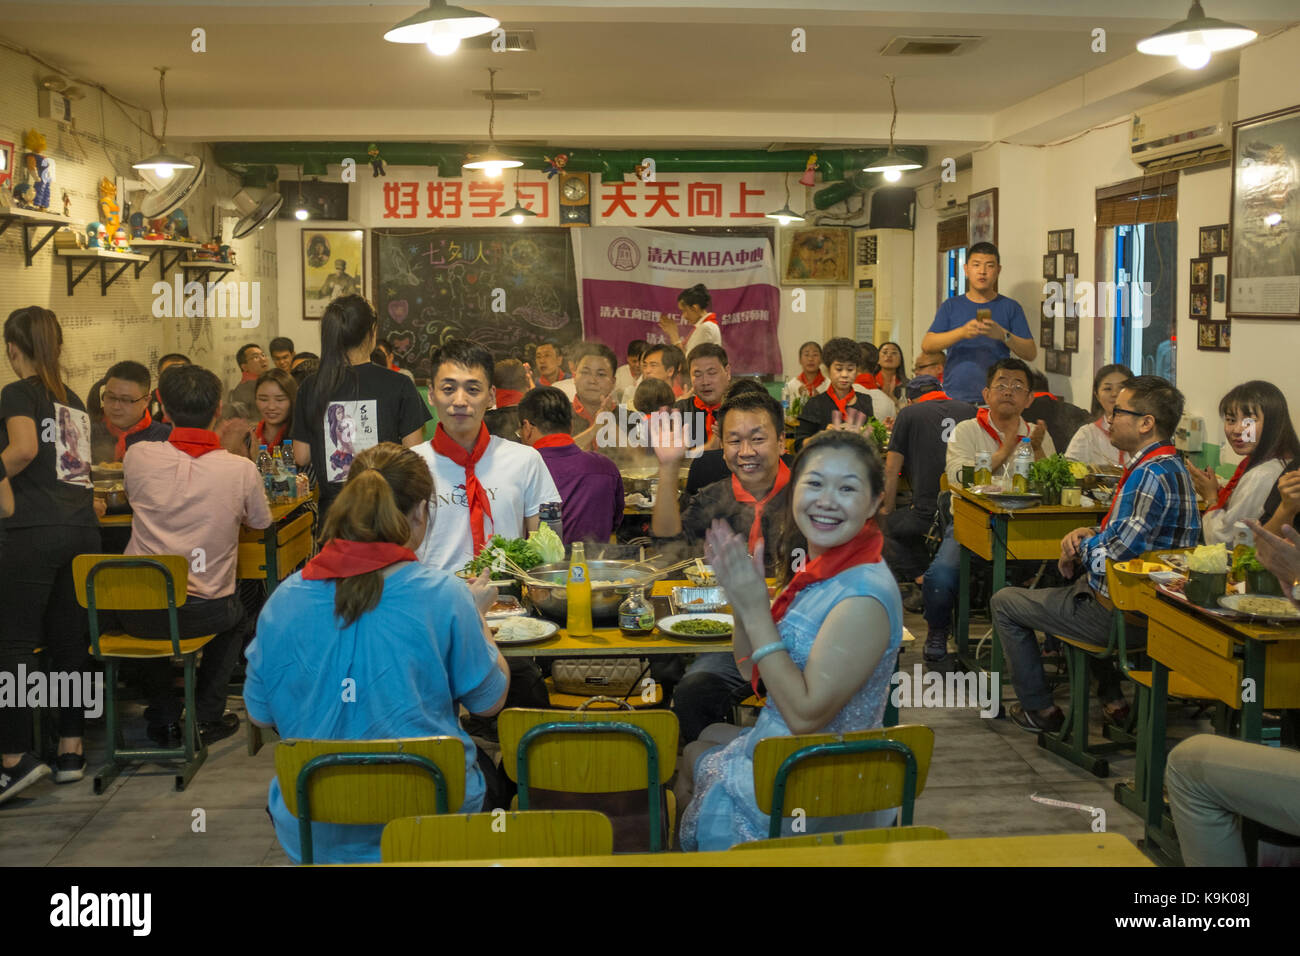 Beijing, China  23rd Sep, 2017. Chinese guests wear red scarves of Young Pioneers in a hot pot restaurant in Beijing, China,  23th September 2017. While nobody wants a return to the period of turbulence that China endured during the 1960s and 1970s, a few restaurants keep the fervor of revolution alive with their communist-kitsch decor and socialist song-and-dance shows. The Chinese characters on the wall read 'Good good study, day day up' -  quotation from Chairman Mao.  Lou Linwei/Alamy Live News Stock Photo